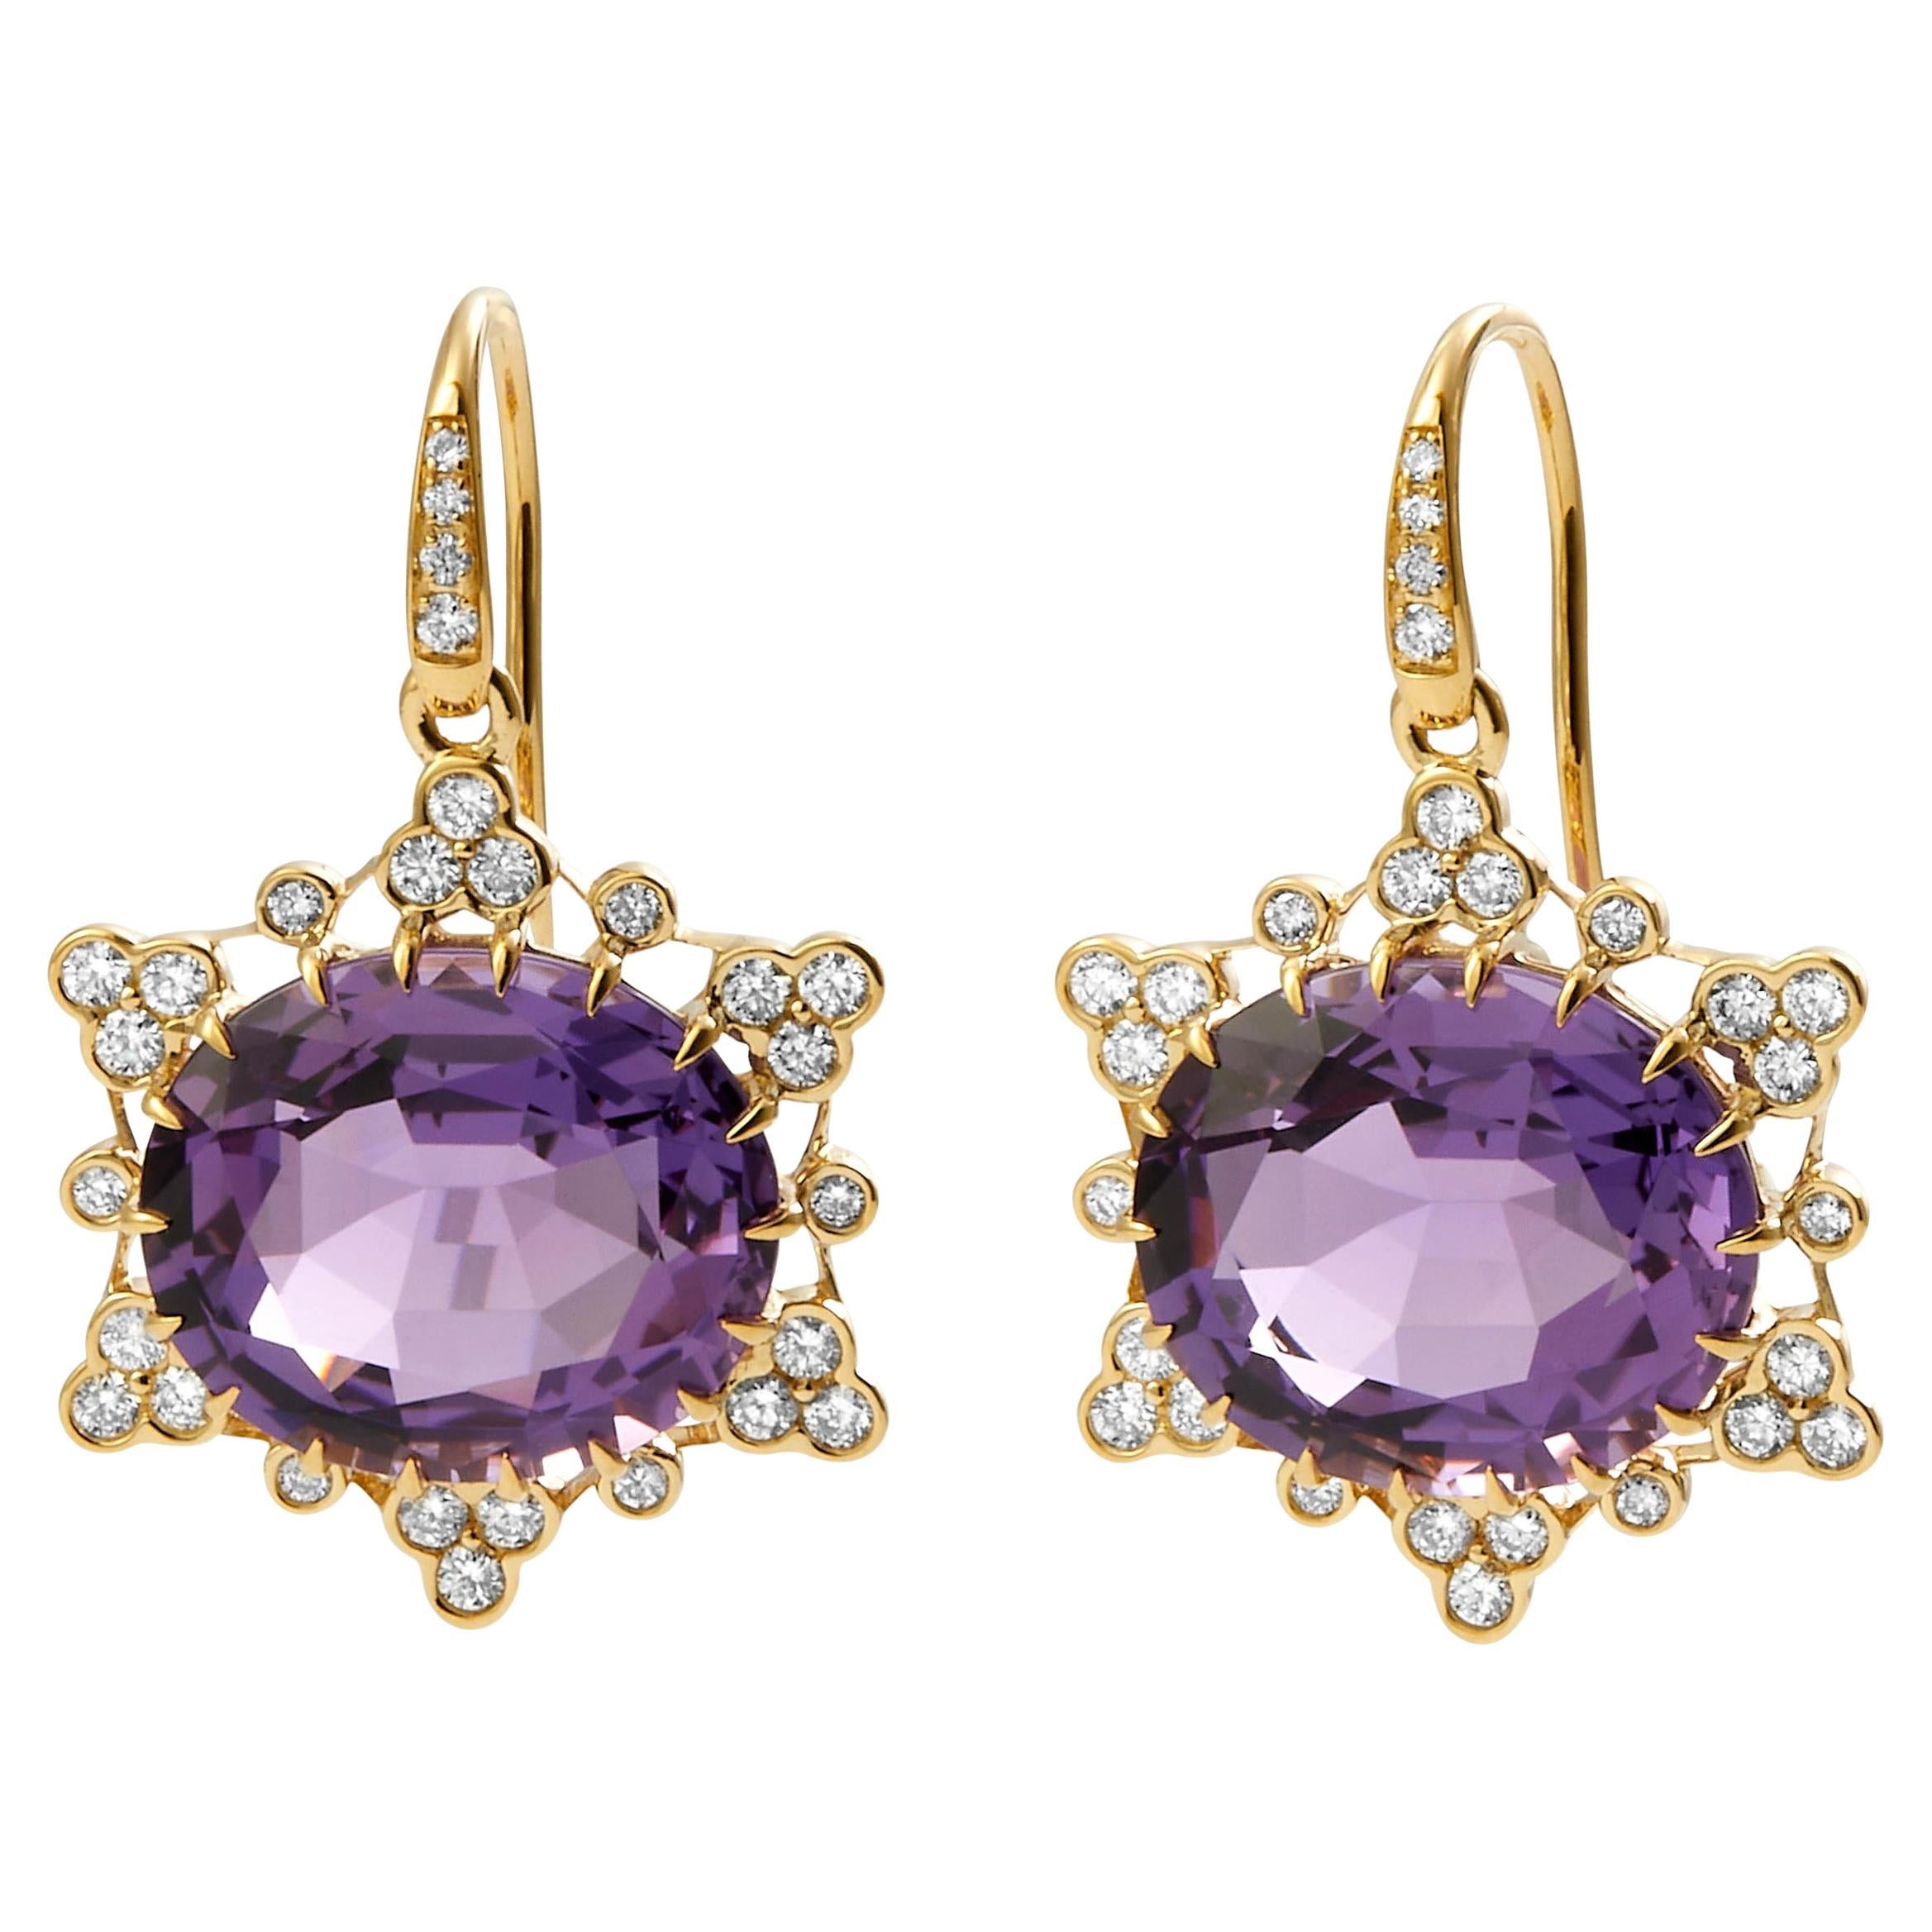 Syna Yellow Gold Amethyst Earrings with Diamonds